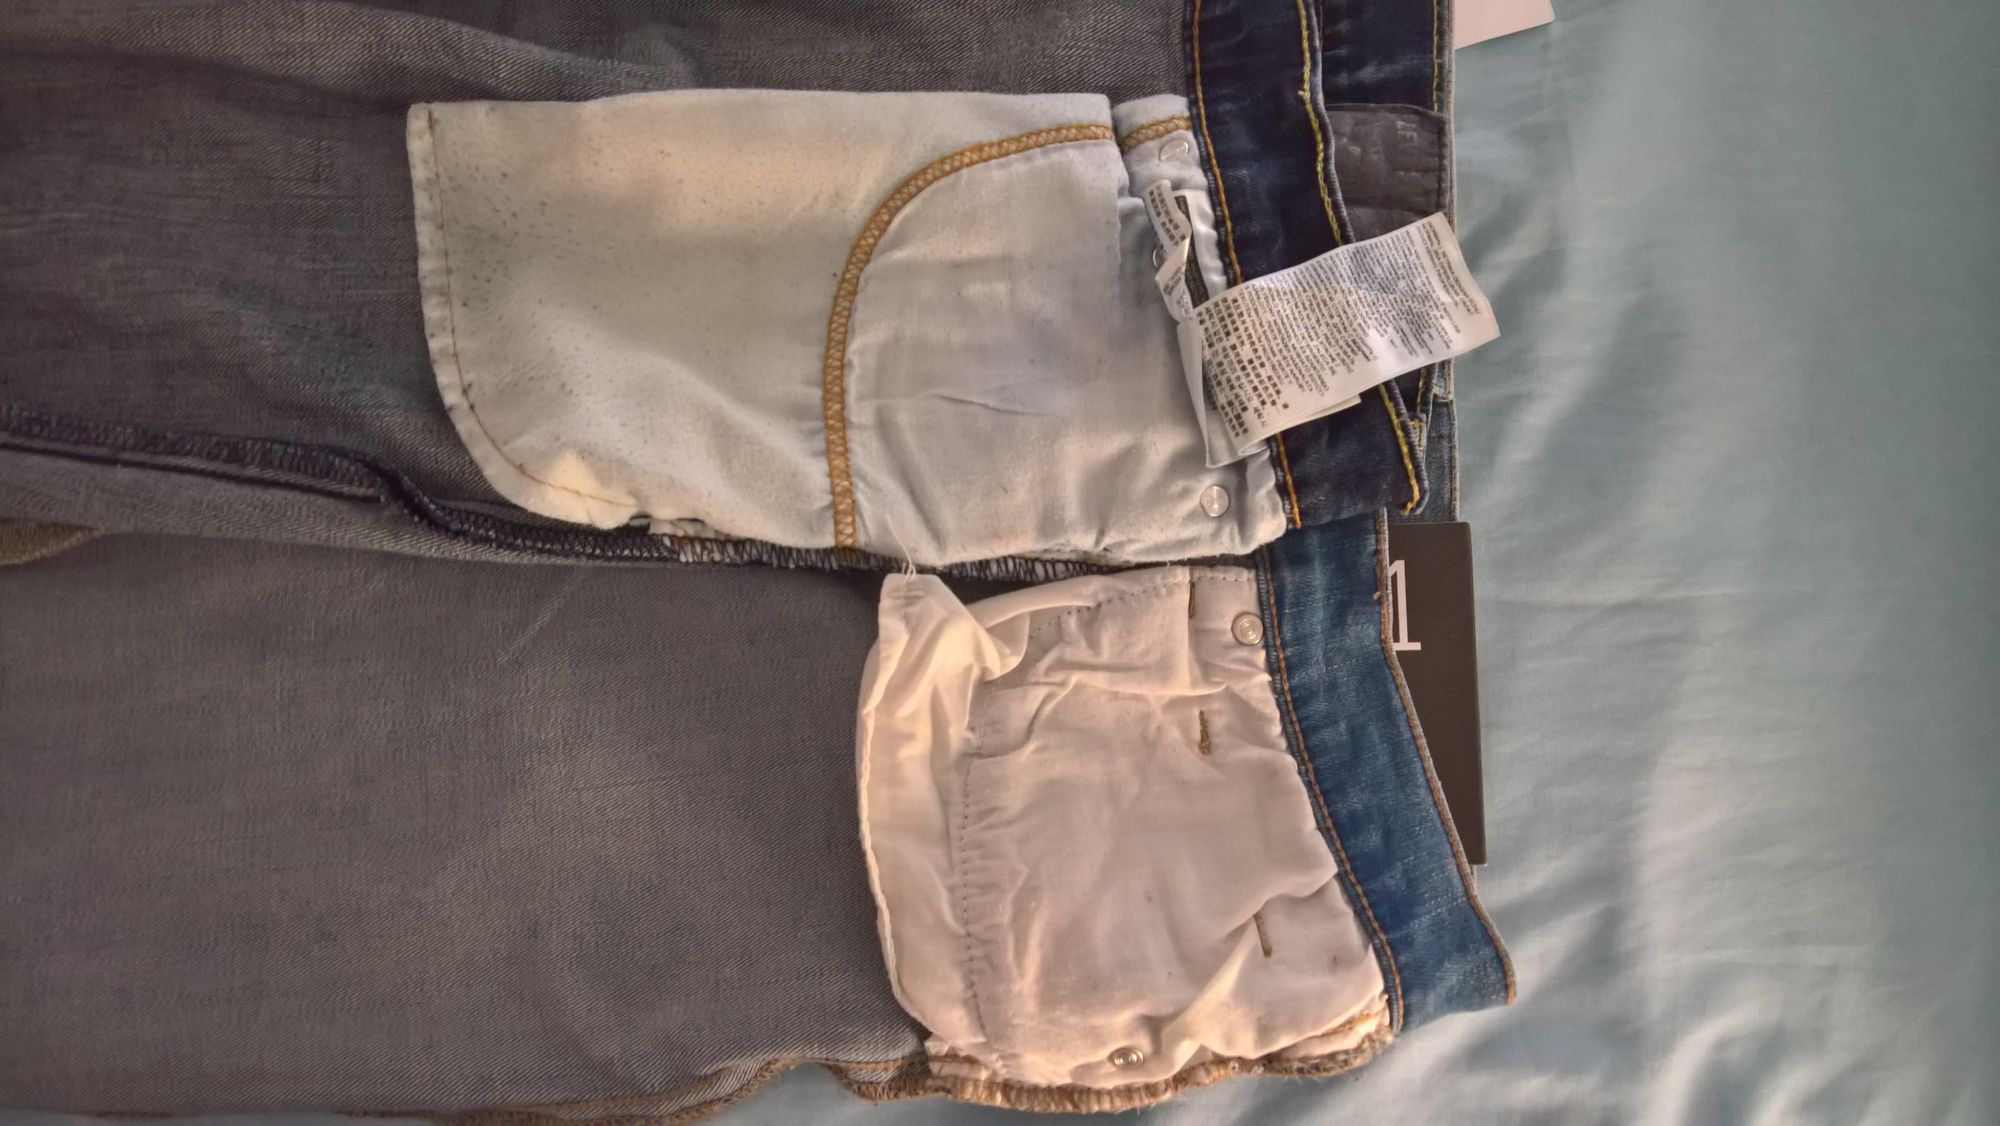 I Wore Women's Jeans for a Week